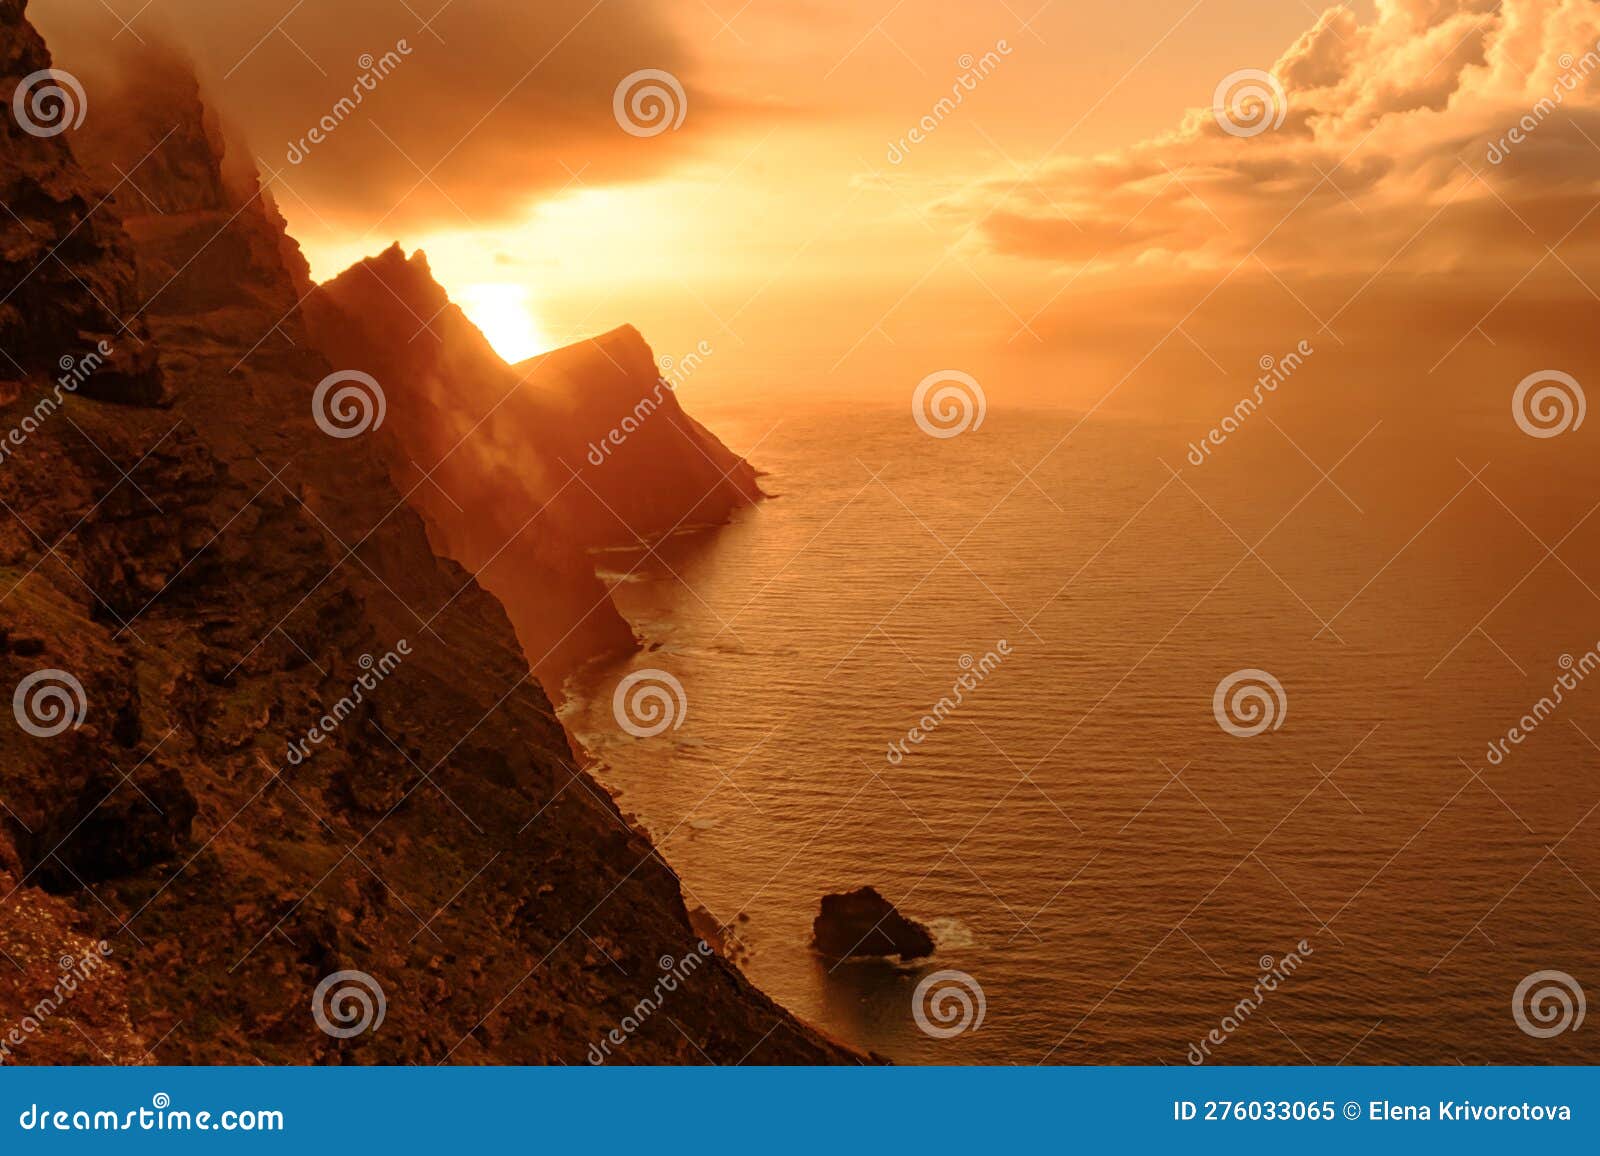 view on the mountains and hills of tamadaba on gran canaria at sunset, canary islands, spain